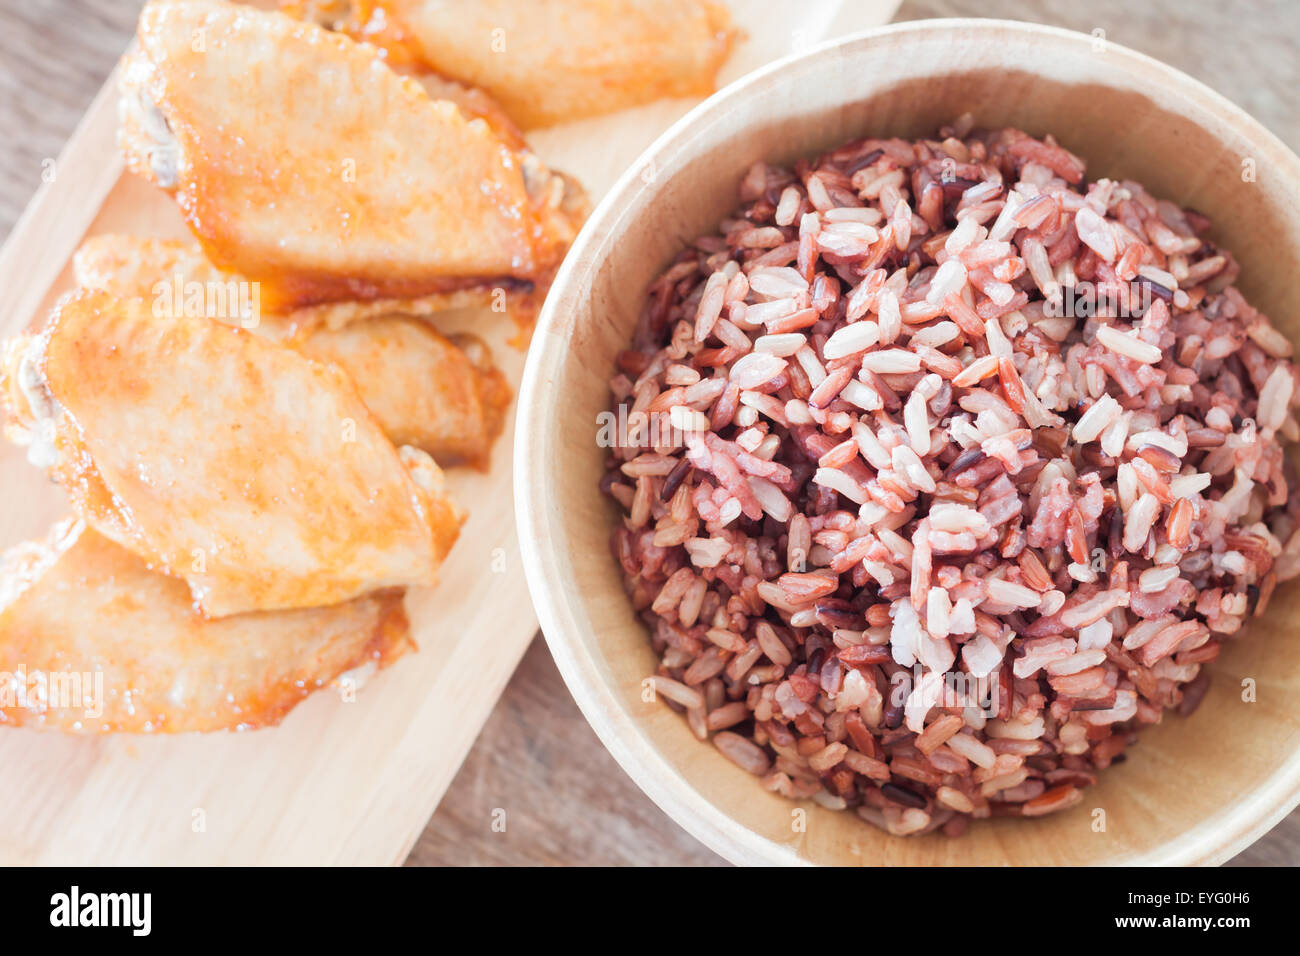 Multi grains berry rice with grilled chicken wings, stock photo Stock Photo